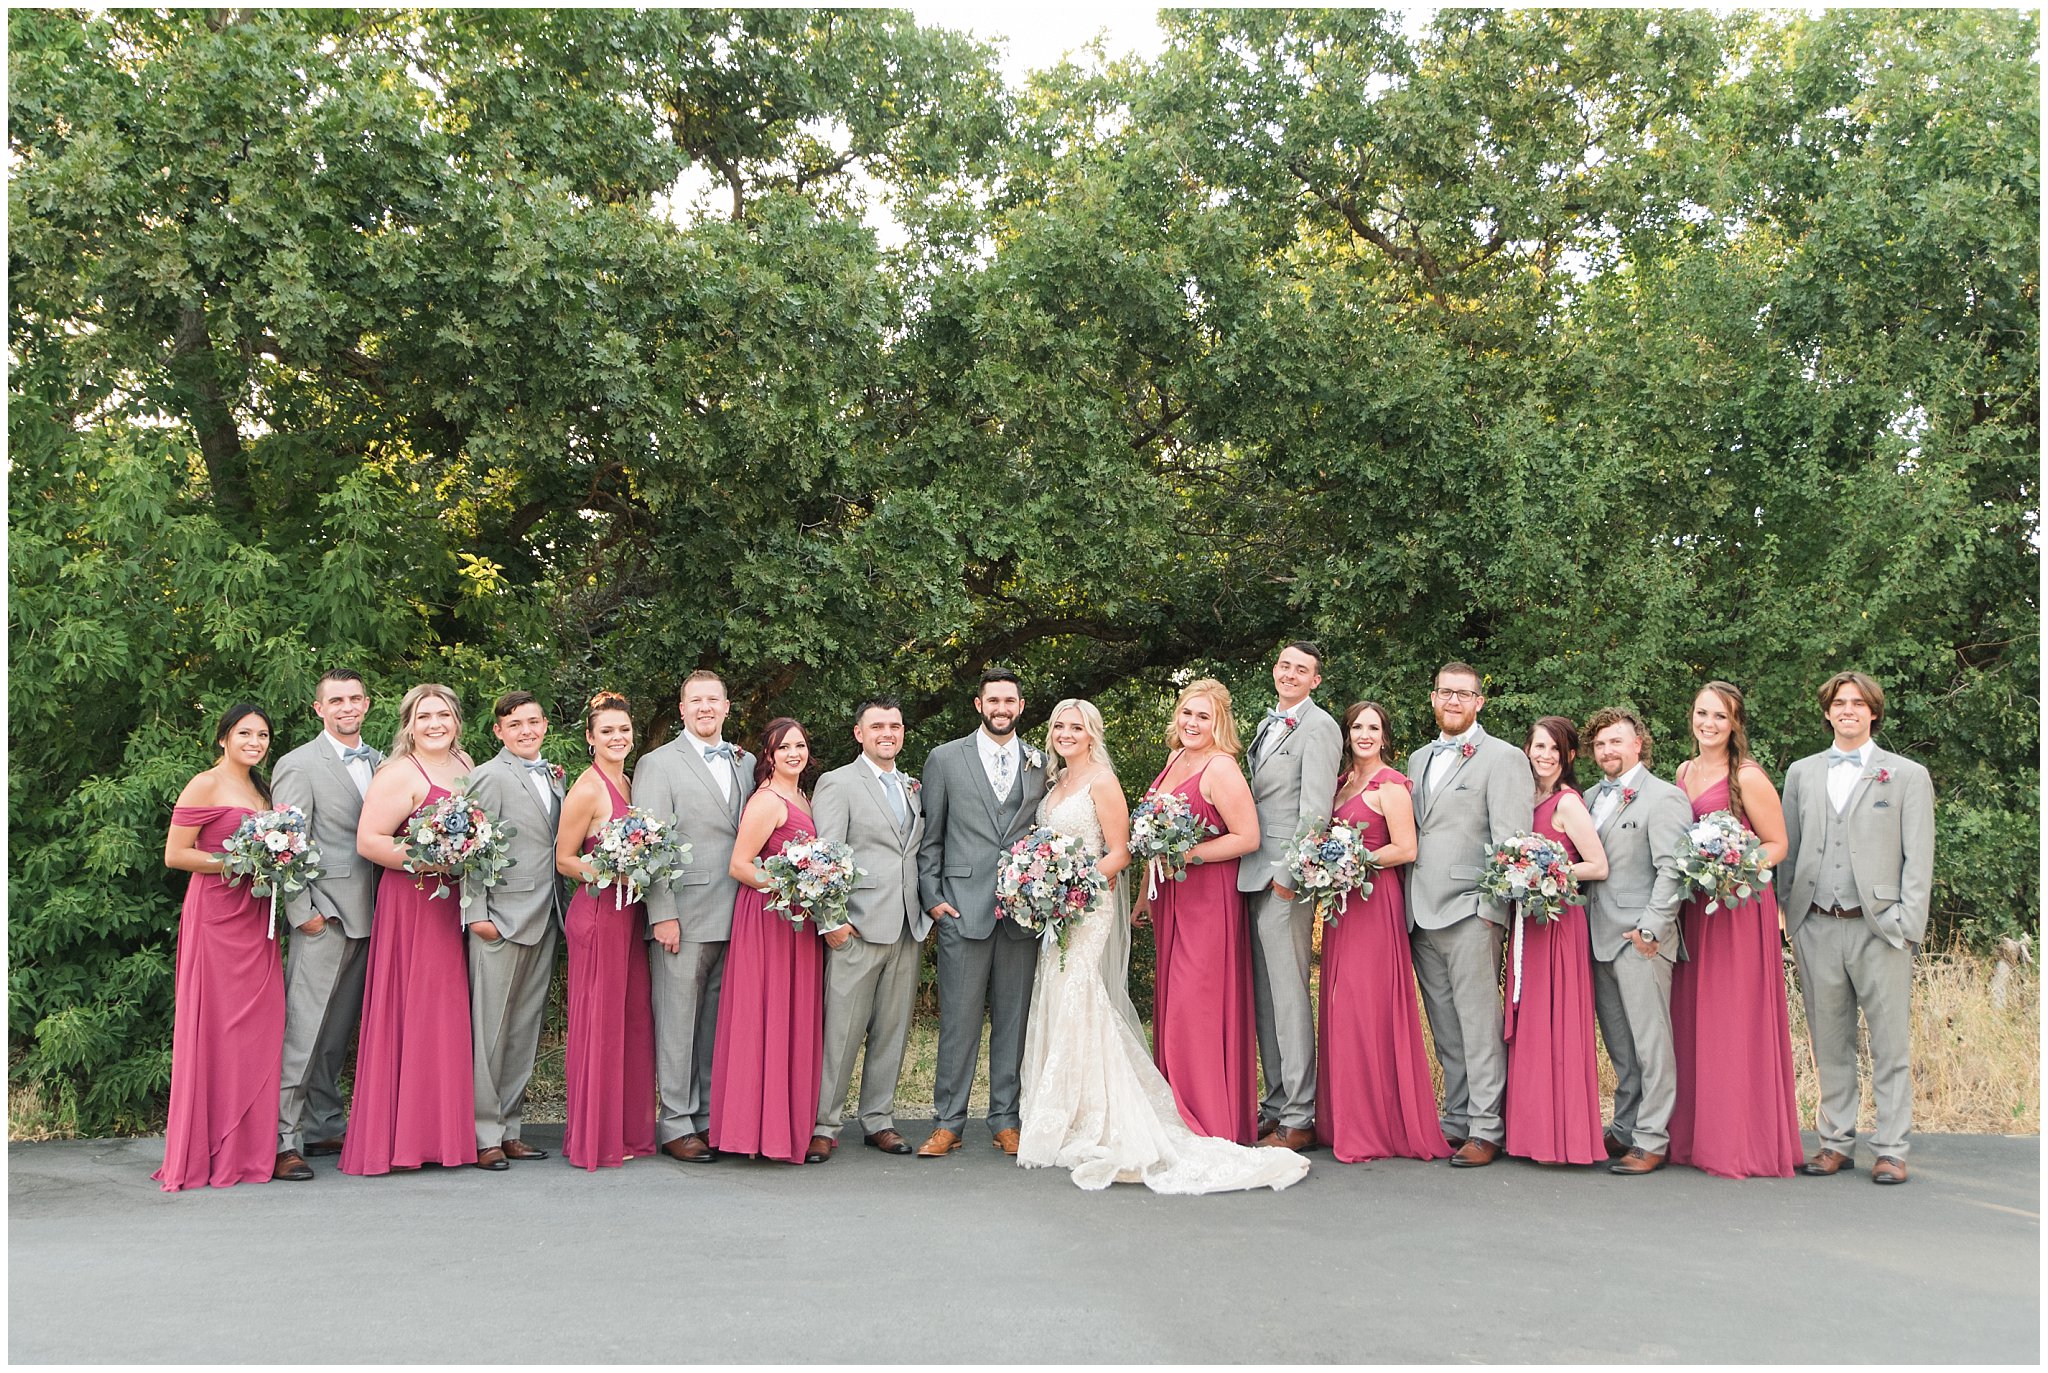 Wedding party wearing gray suits and blue ties and maroon dresses | Dusty Blue and Rose Summer Wedding at Oak Hills Utah | Jessie and Dallin Photography